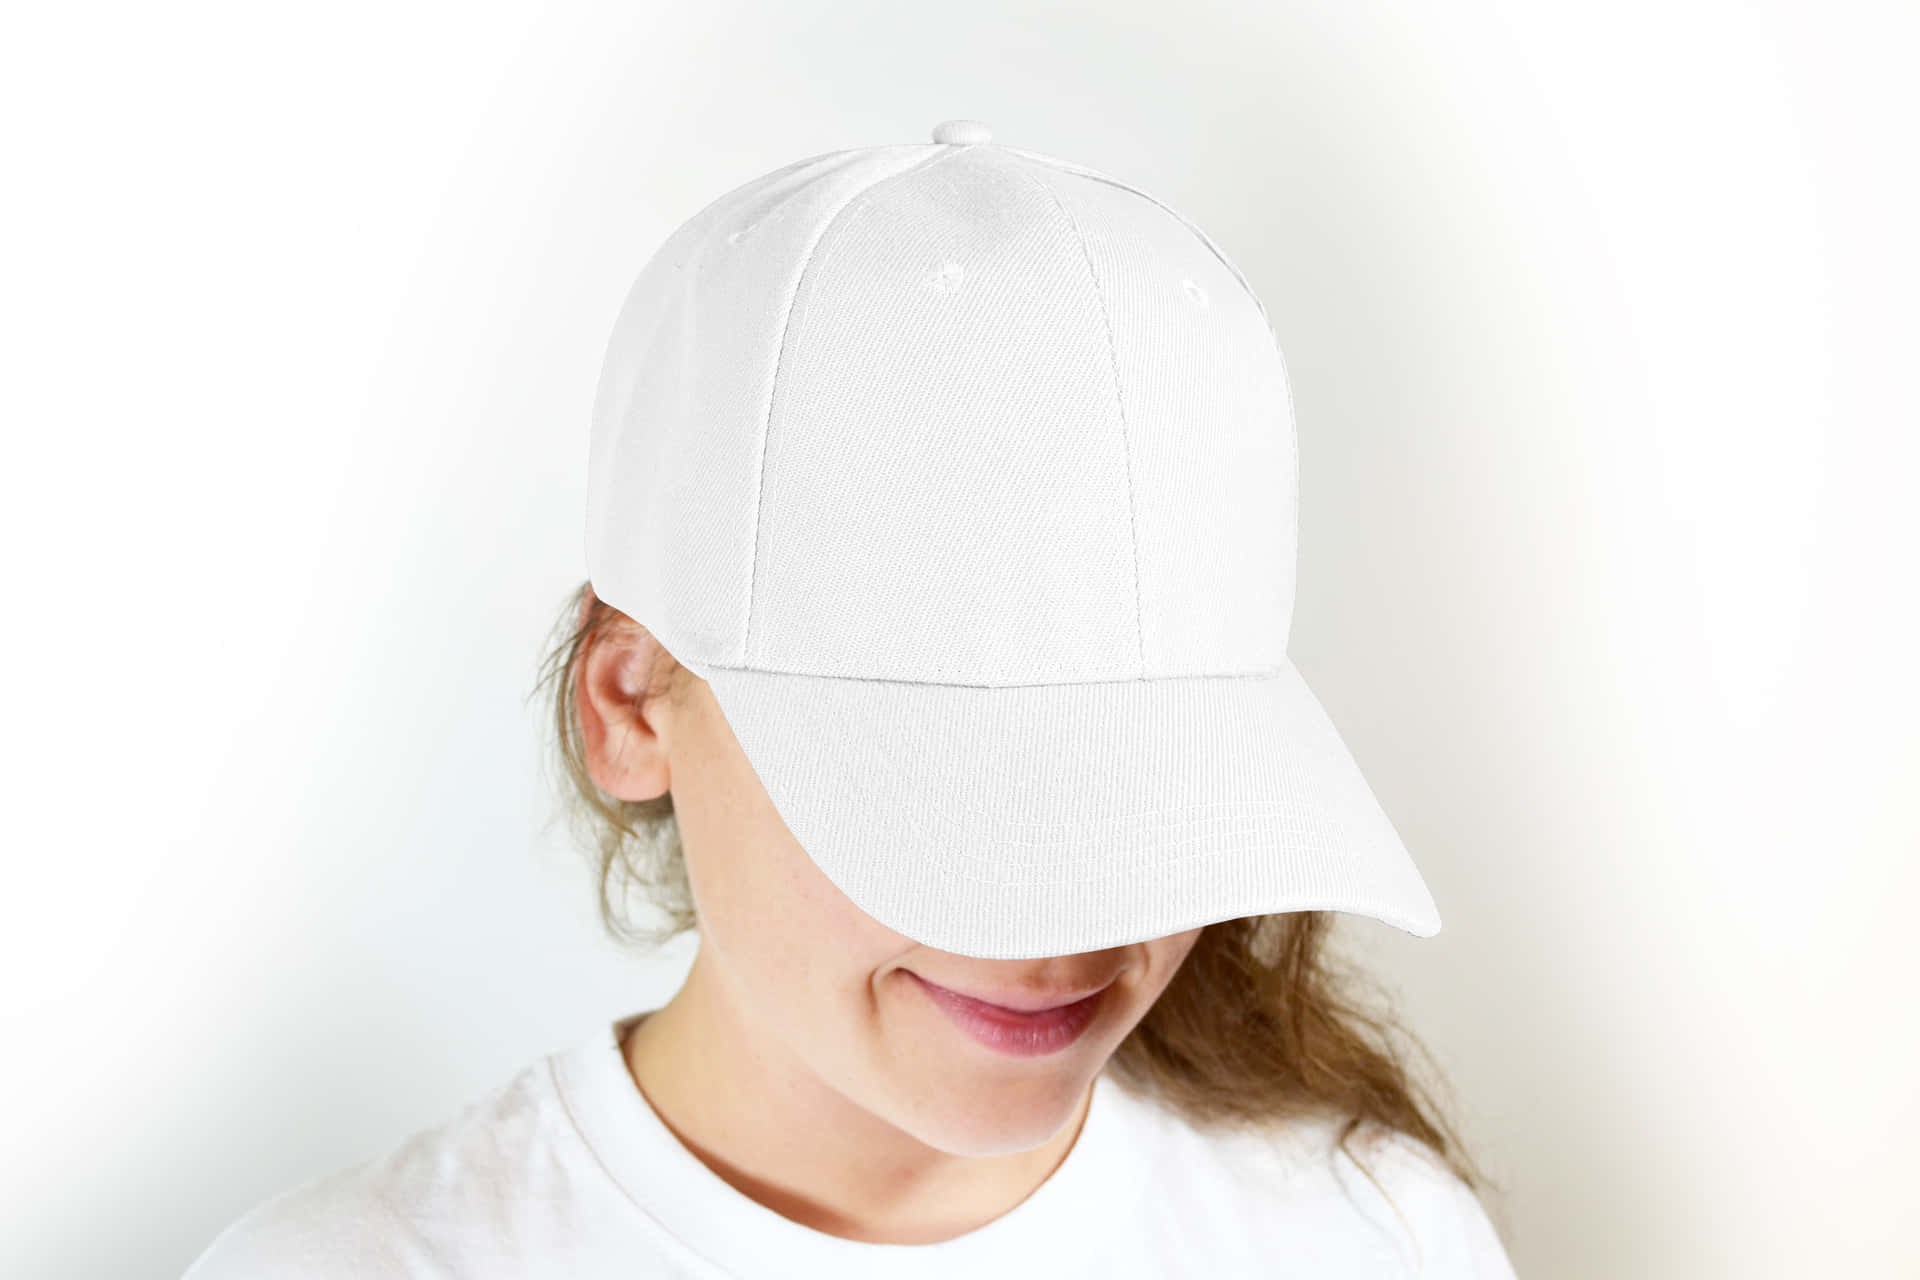 Cool Girl Wearing A White Cap Background